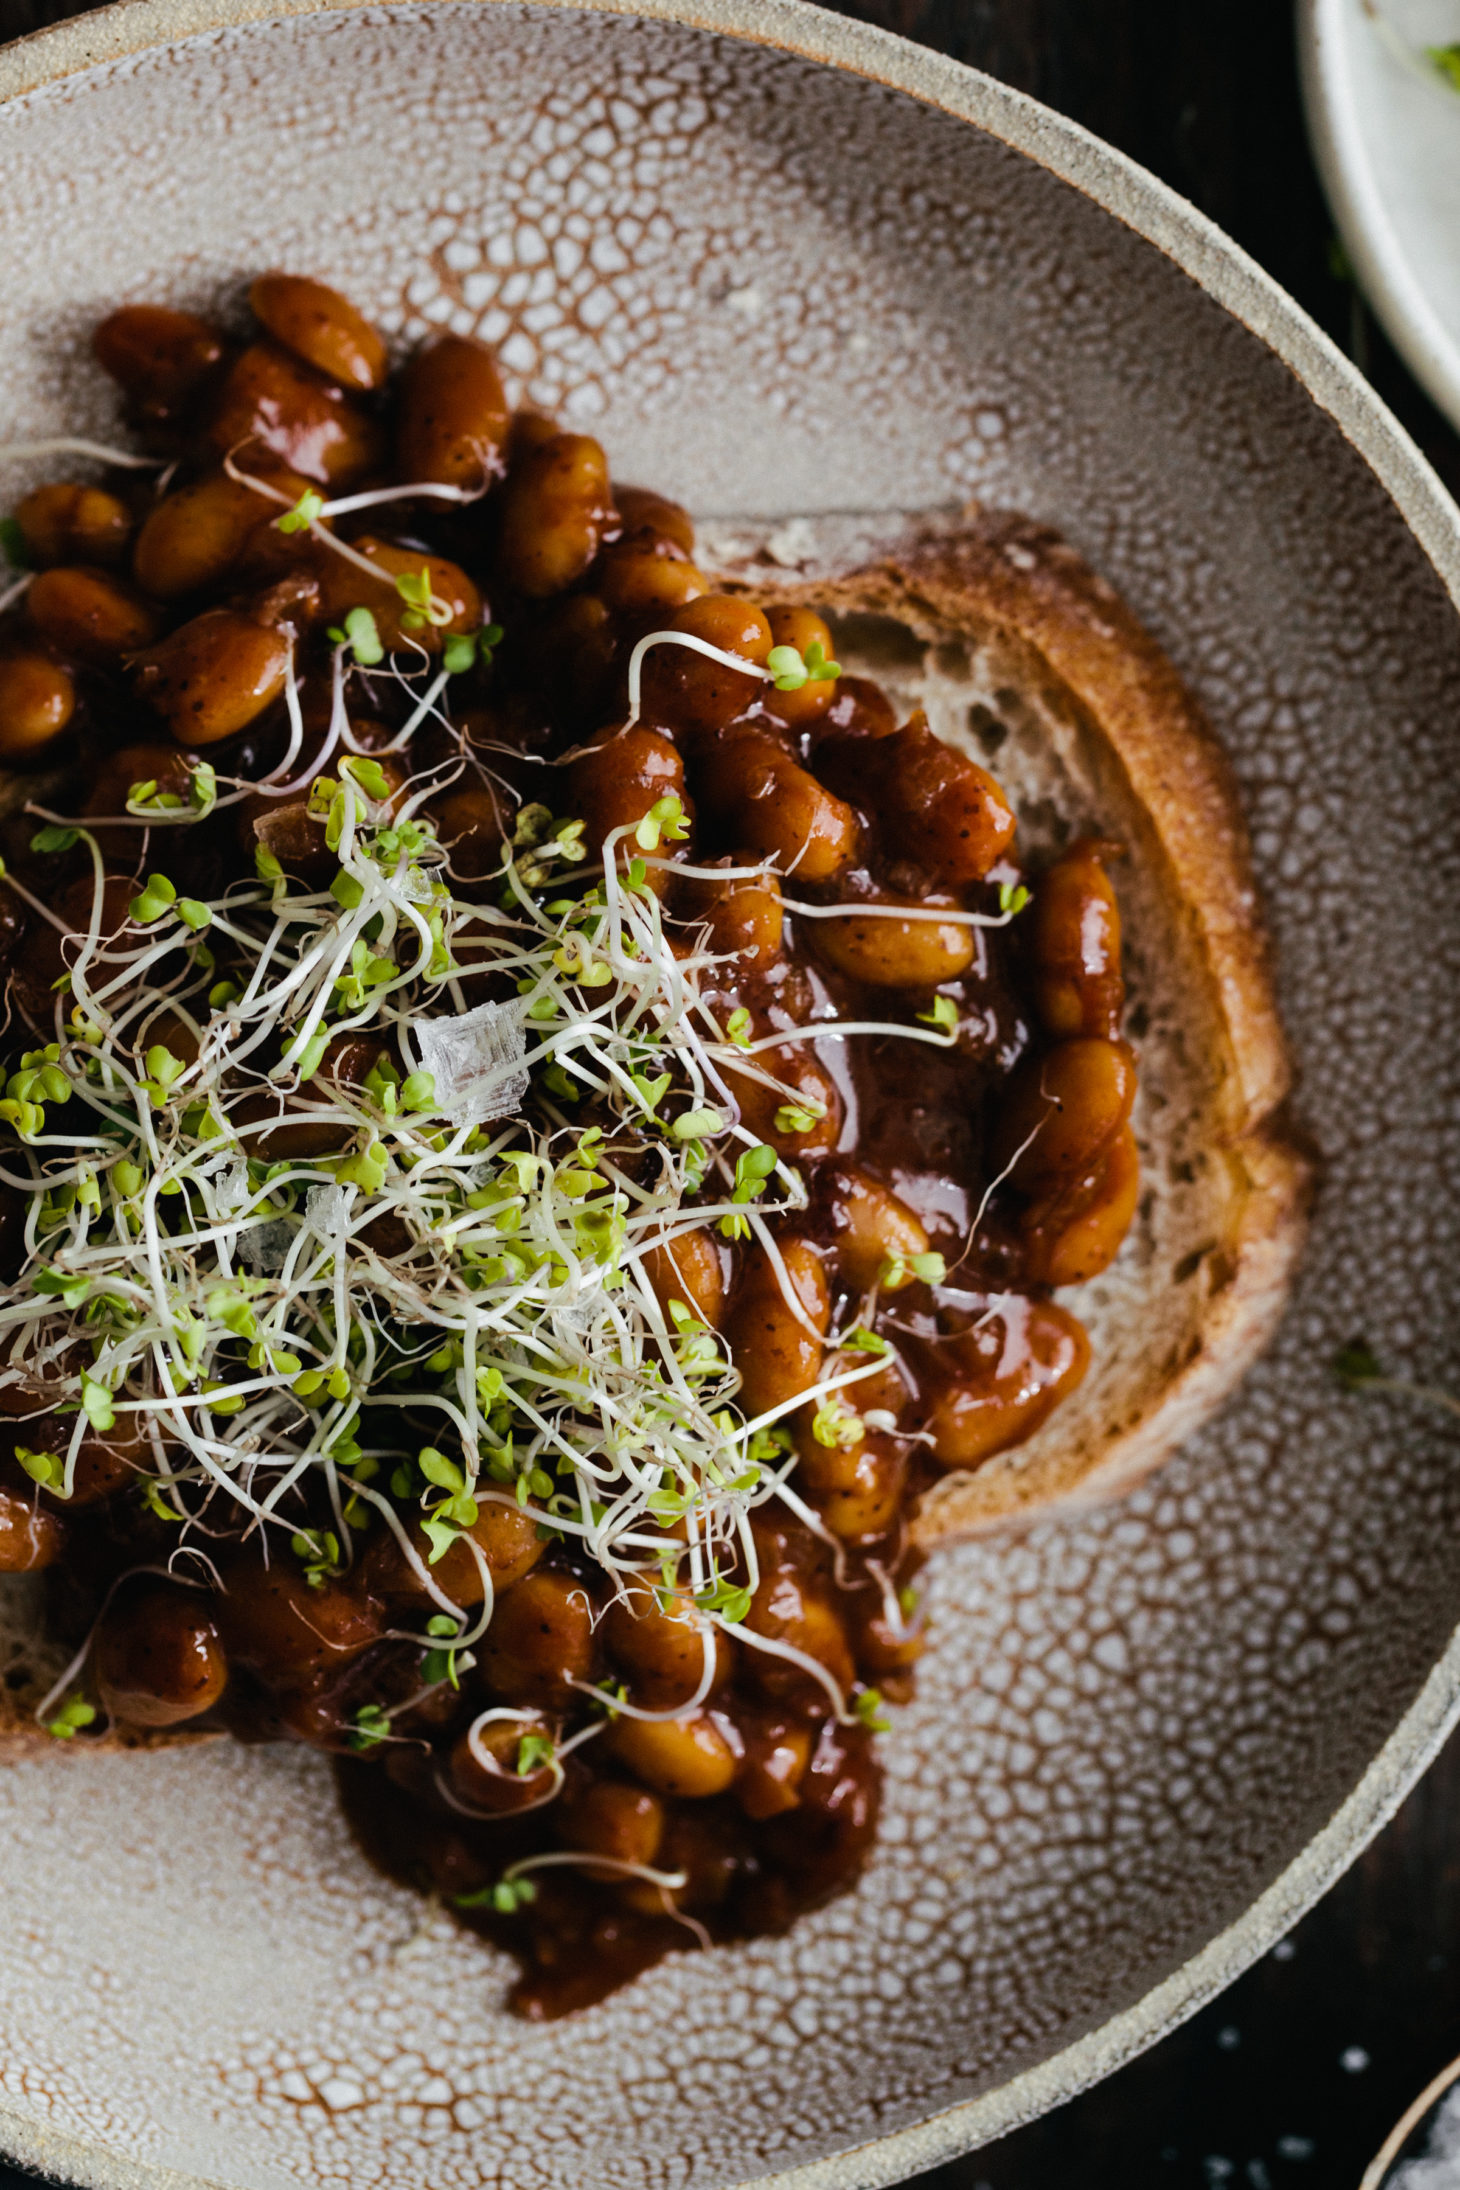 Photograph of Vegan Baked Beans on Toast, topped with microgreens